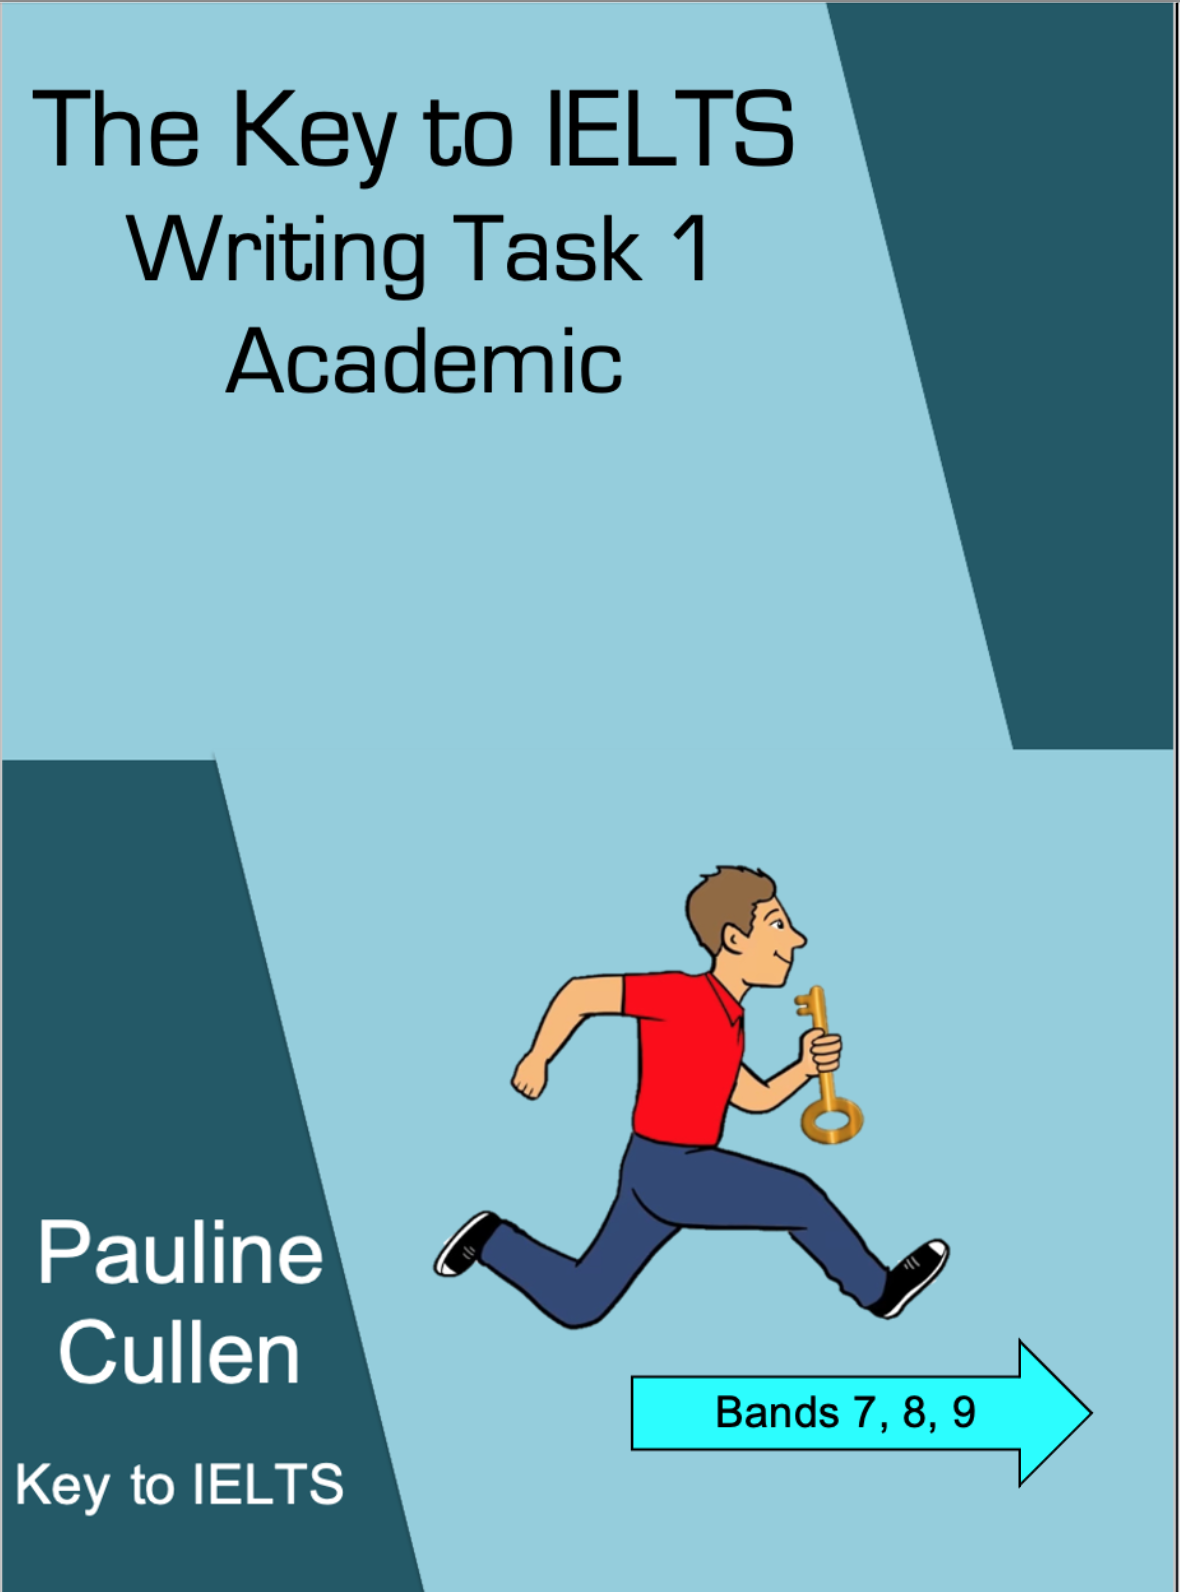 The Key to IELTS Academic Writing Task 1